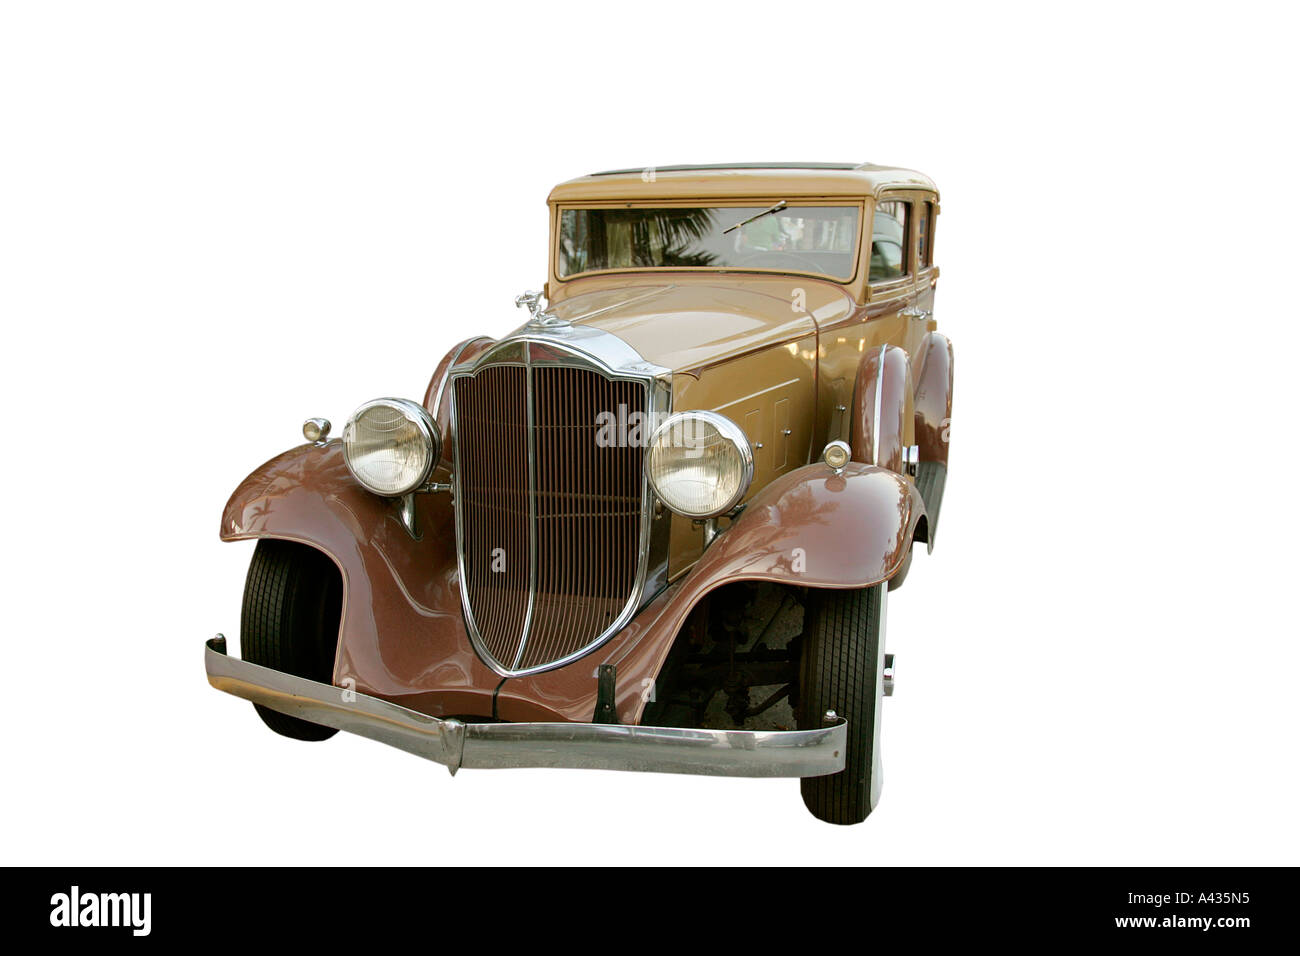 American old car classic history vehicle vintage antipodes symbol collector age golden motoring car transport restoration Stock Photo